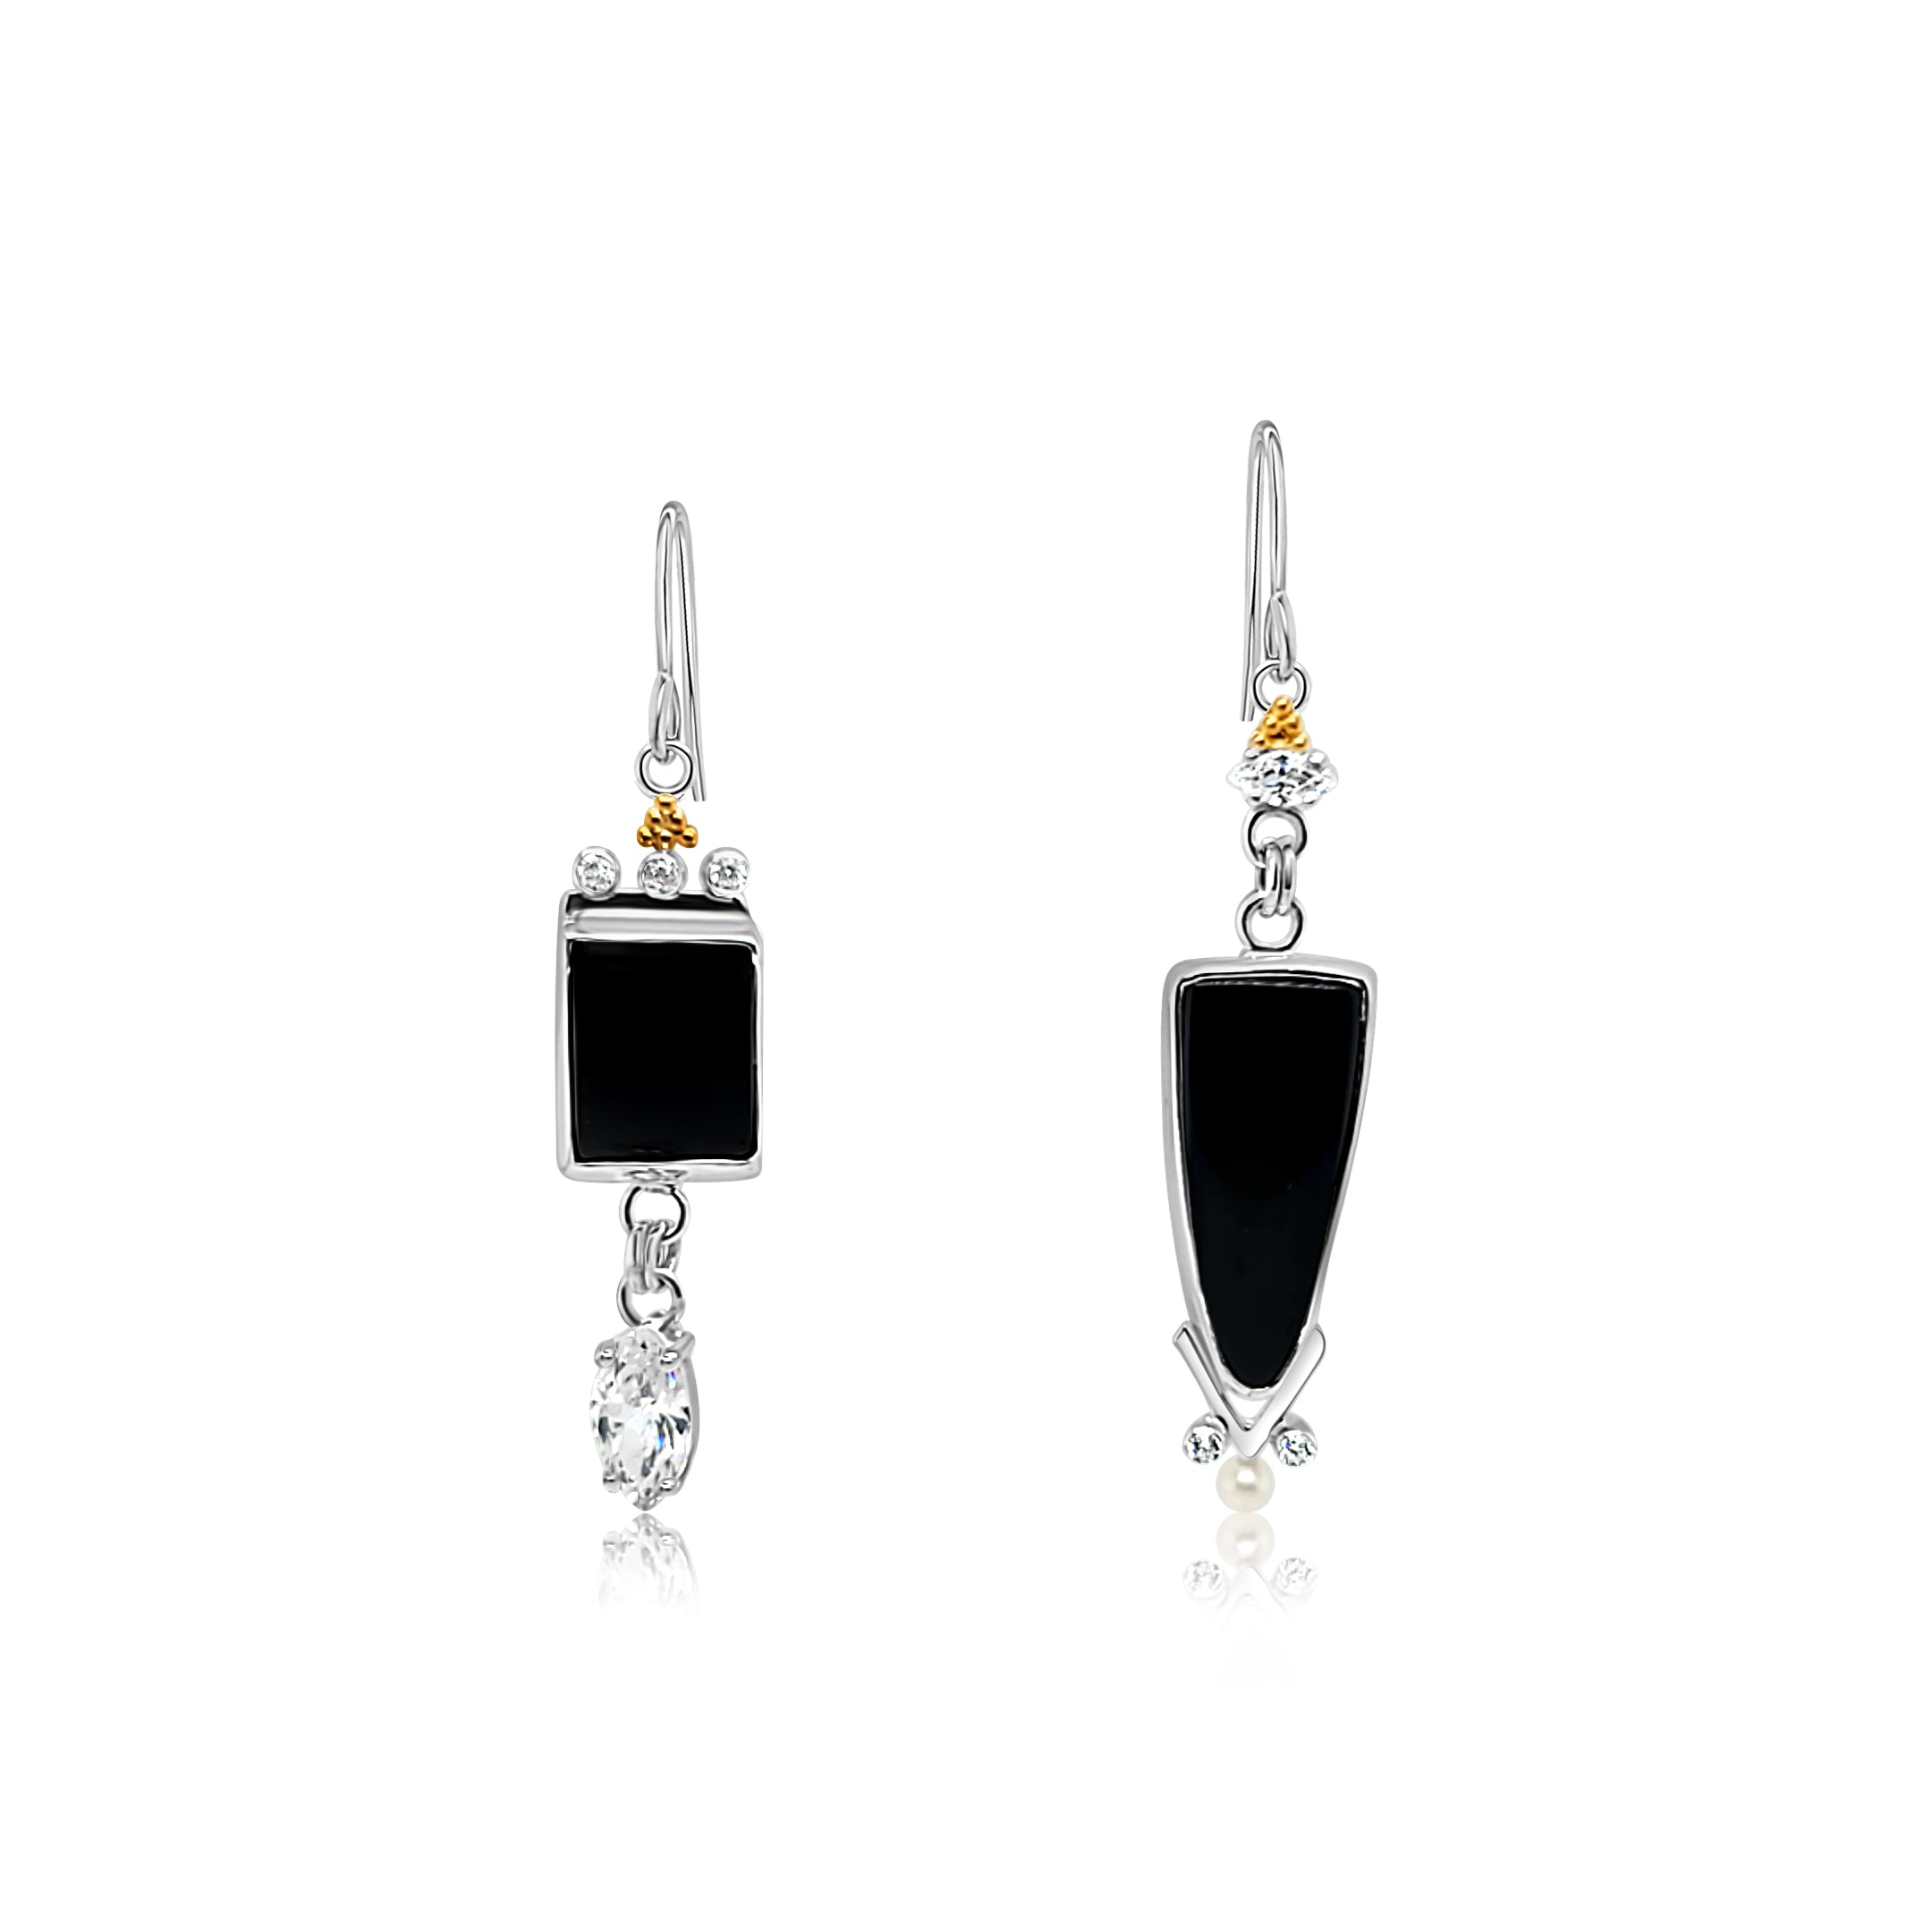 Sterling Silver, Black Onyx, Freshwater Pearls and Cubic Zirconia Earrings